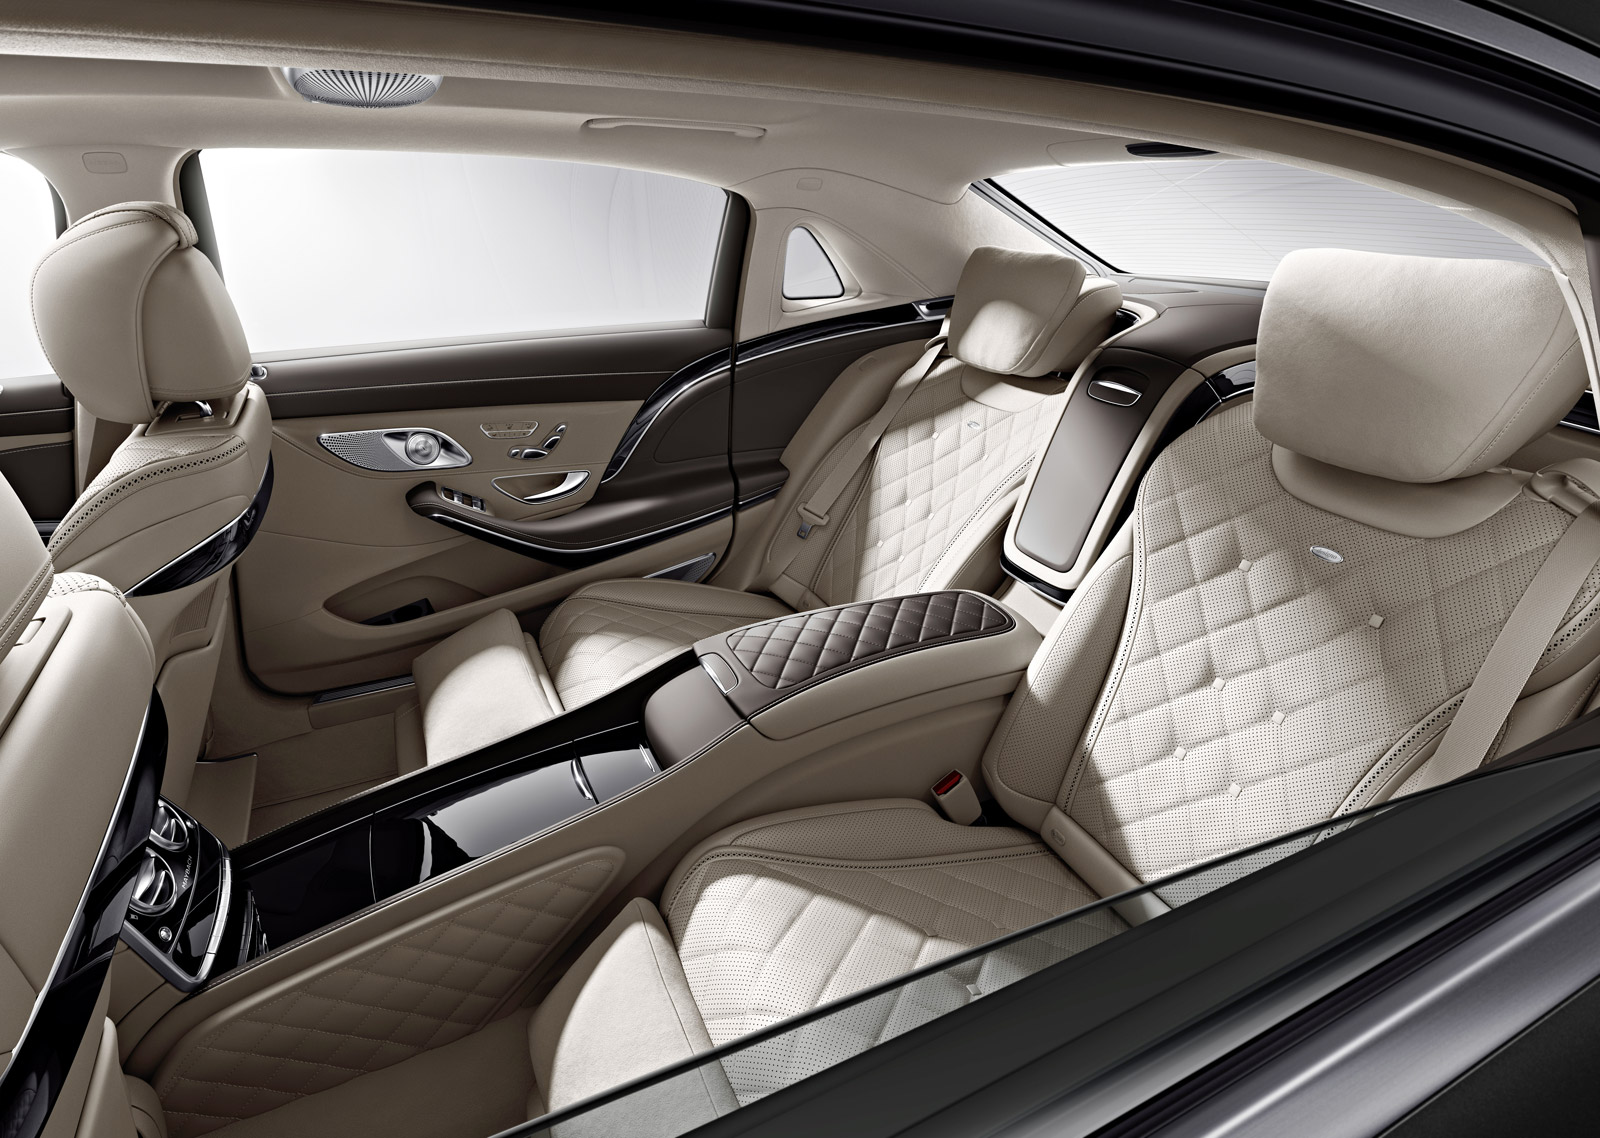 Mercedes Benz Confirms Return Of Maybach As New Ultra Luxury